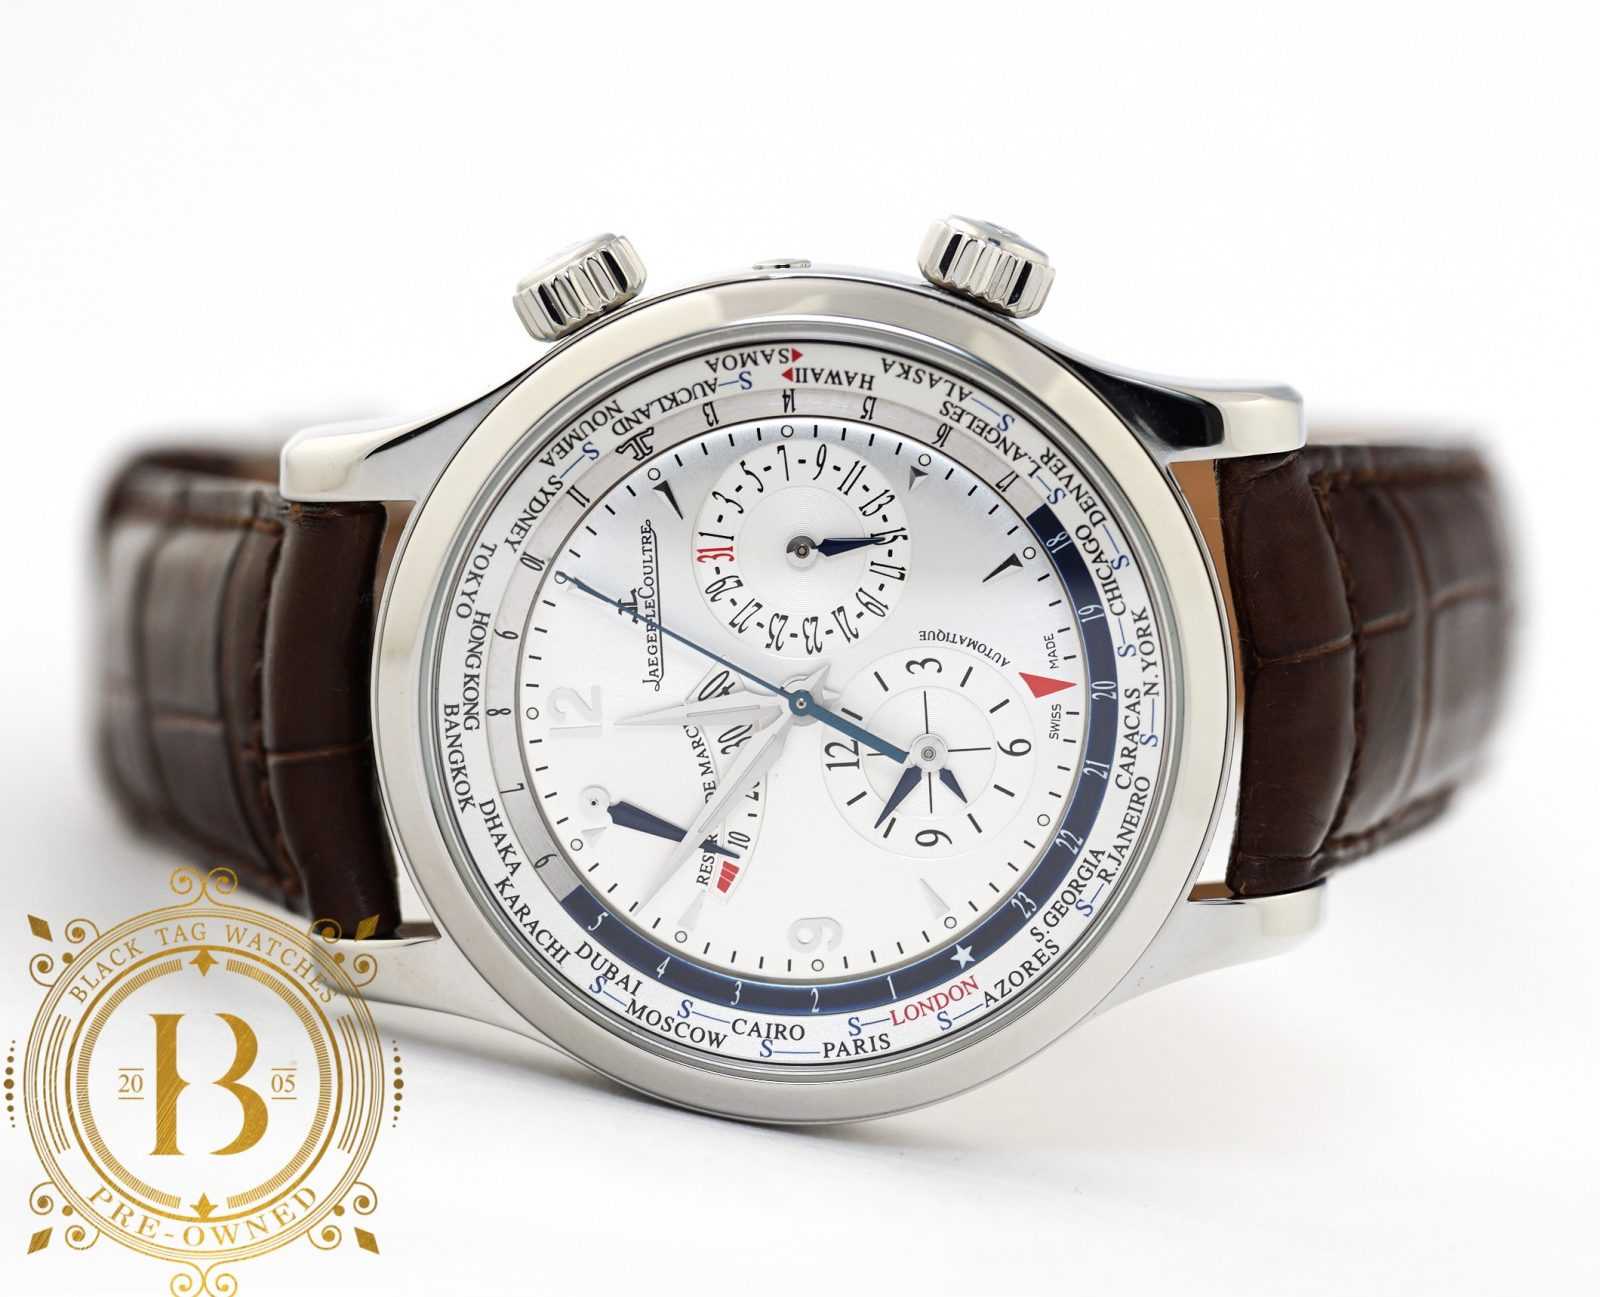 Jaeger-LeCoultre Master World Geographic Watch Q1528420 for $8,500 ...